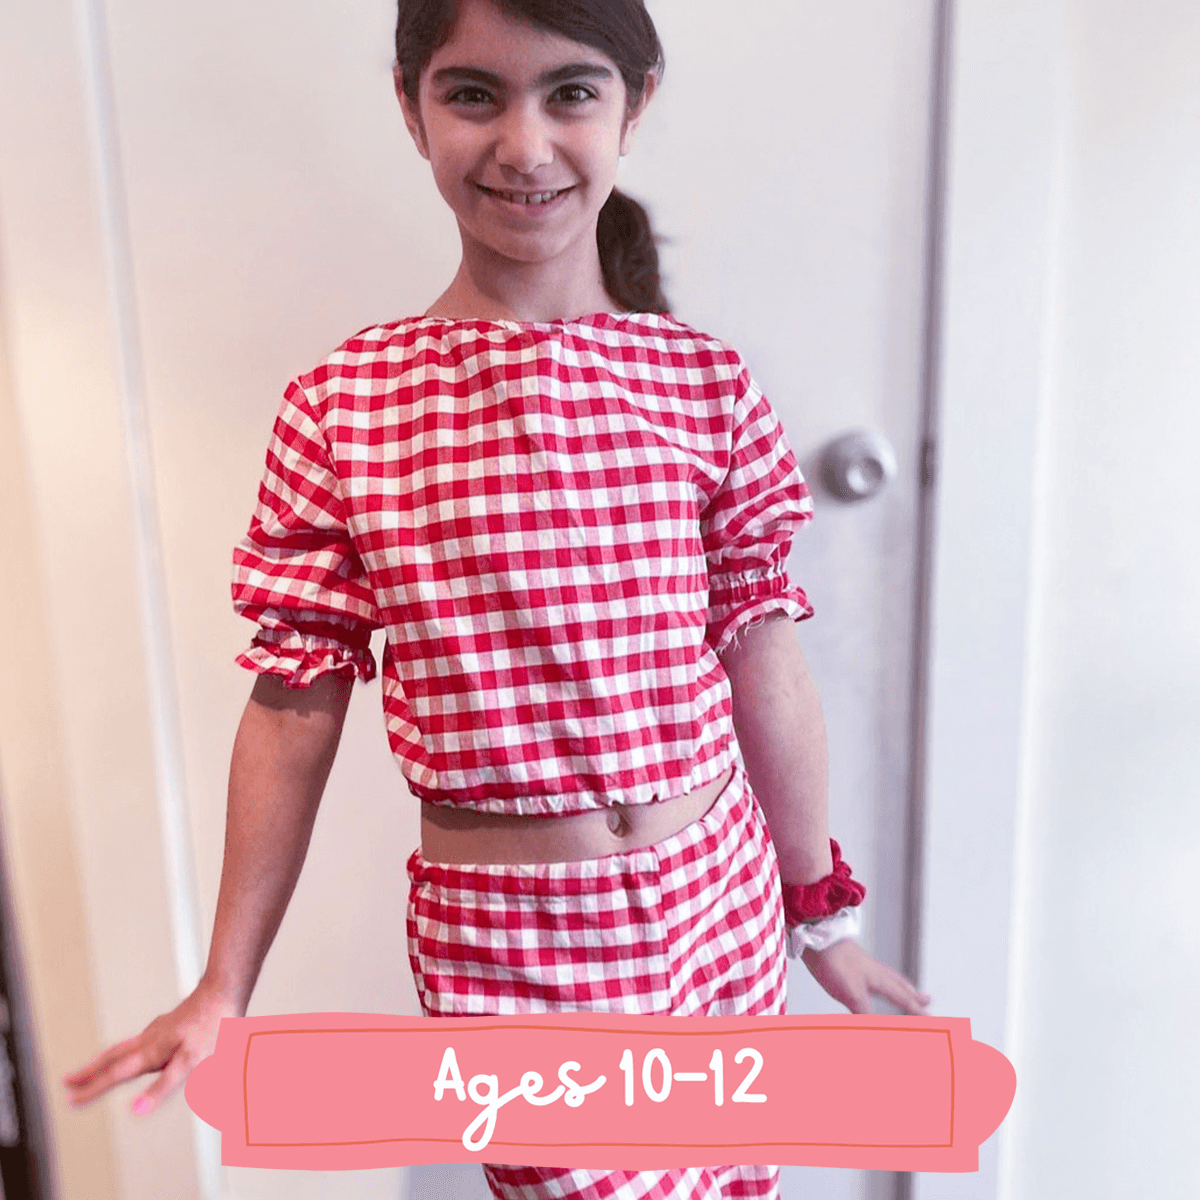 Advanced Sewing and Fashion Design Class for Teens – AnetaArtClasses